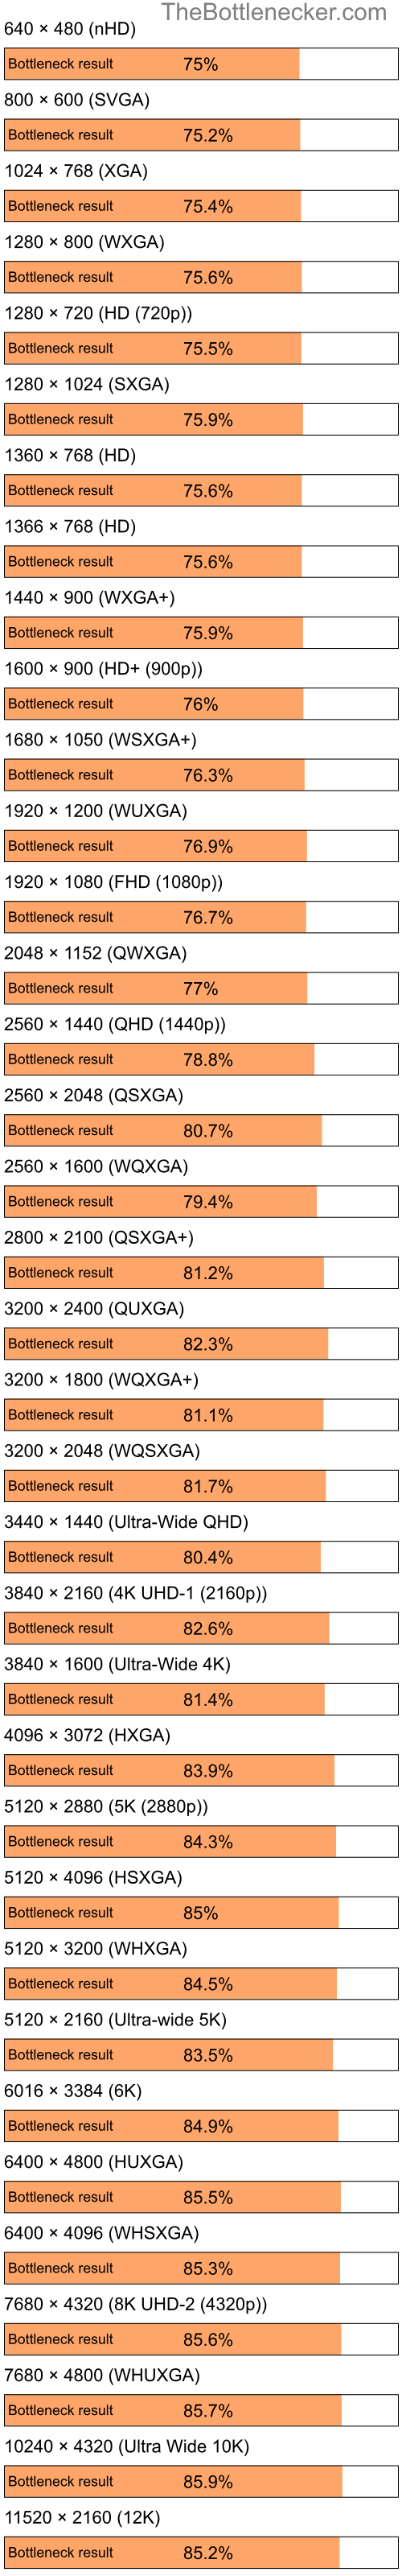 Bottleneck results by resolution for Intel Pentium 4 and AMD Mobility Radeon X2300 in7 Days to Die